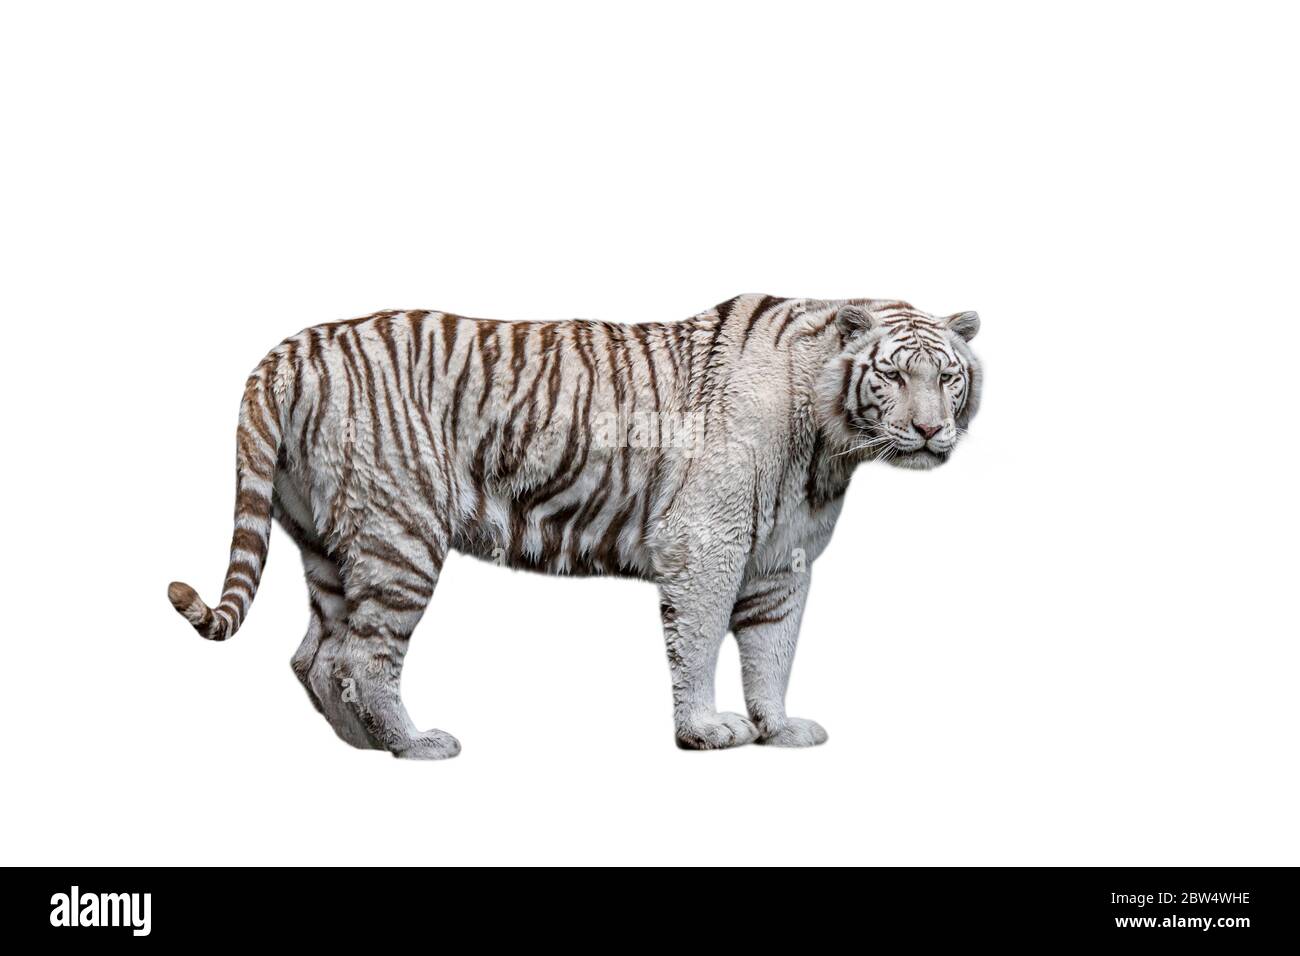 White tiger / bleached tiger (Panthera tigris) pigmentation variant of the Bengal tiger, native to India against white background Stock Photo